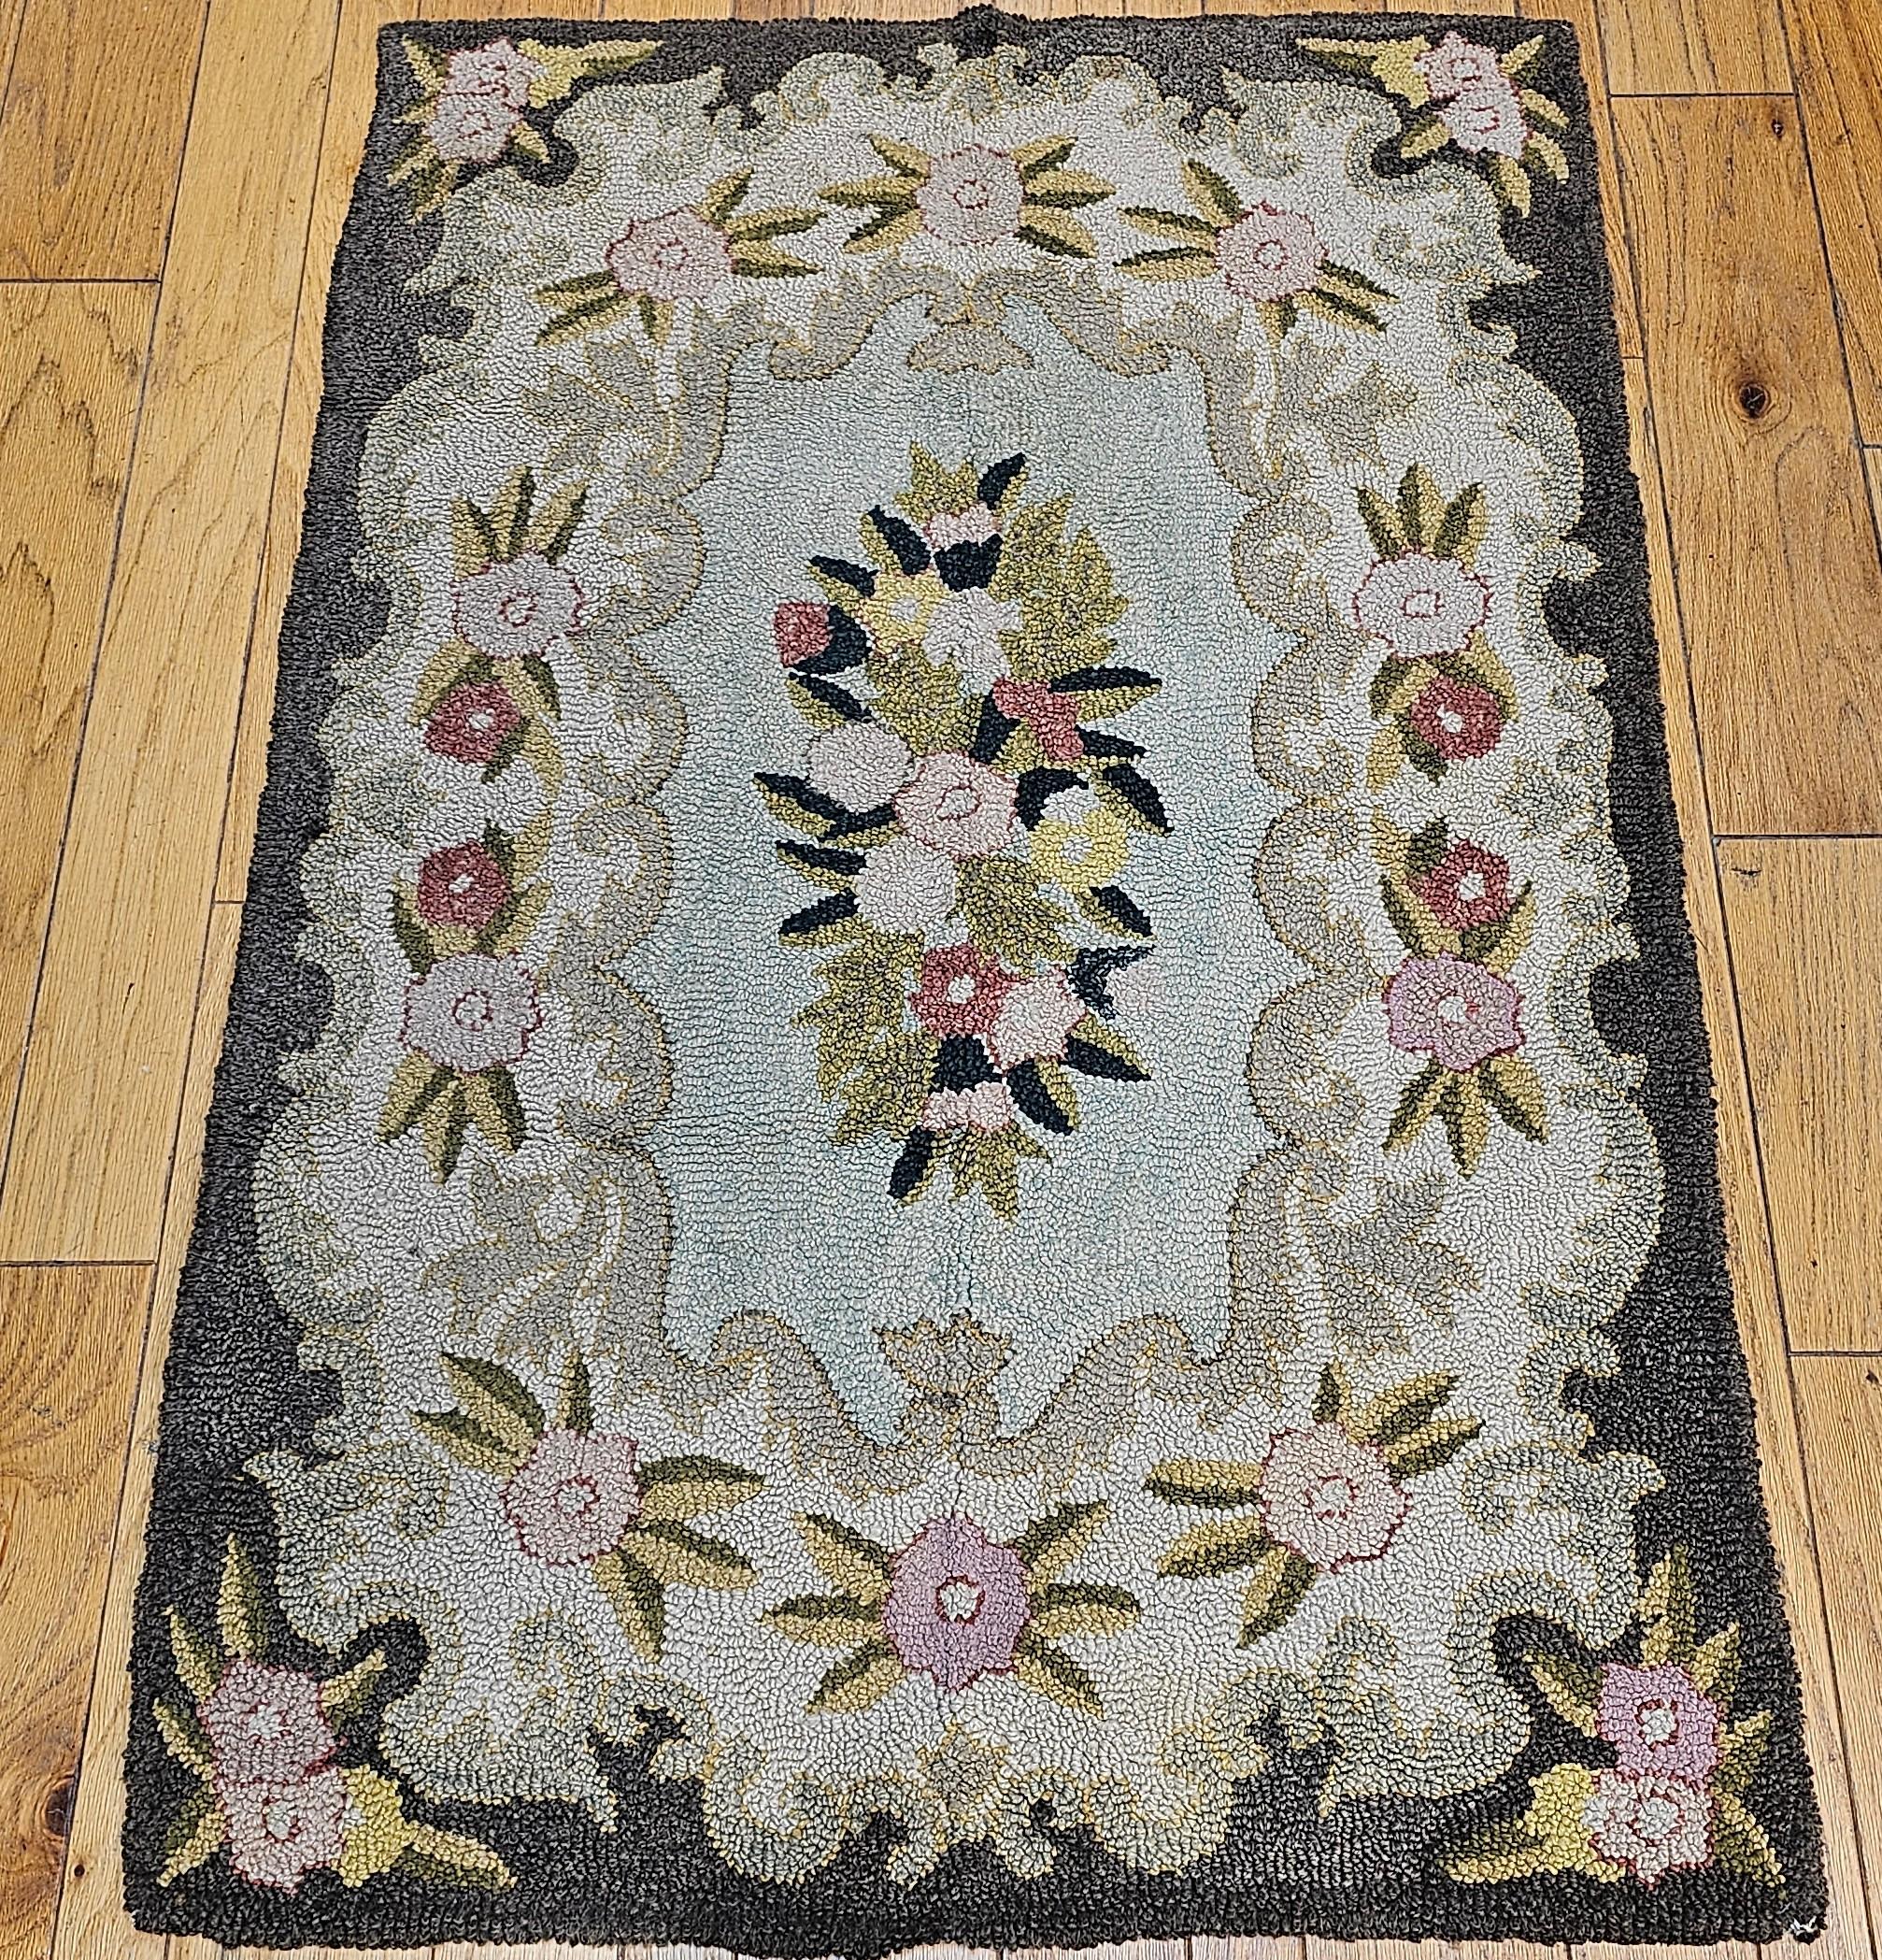 Beautiful hand-hooked area rug from the mid 1900s.  The rug has a floral pattern set in a pale green background.  The center medallion is a bouquet of flowers in pastel color including pale green, yellow, ivory and pink.  The edge of the rug is a